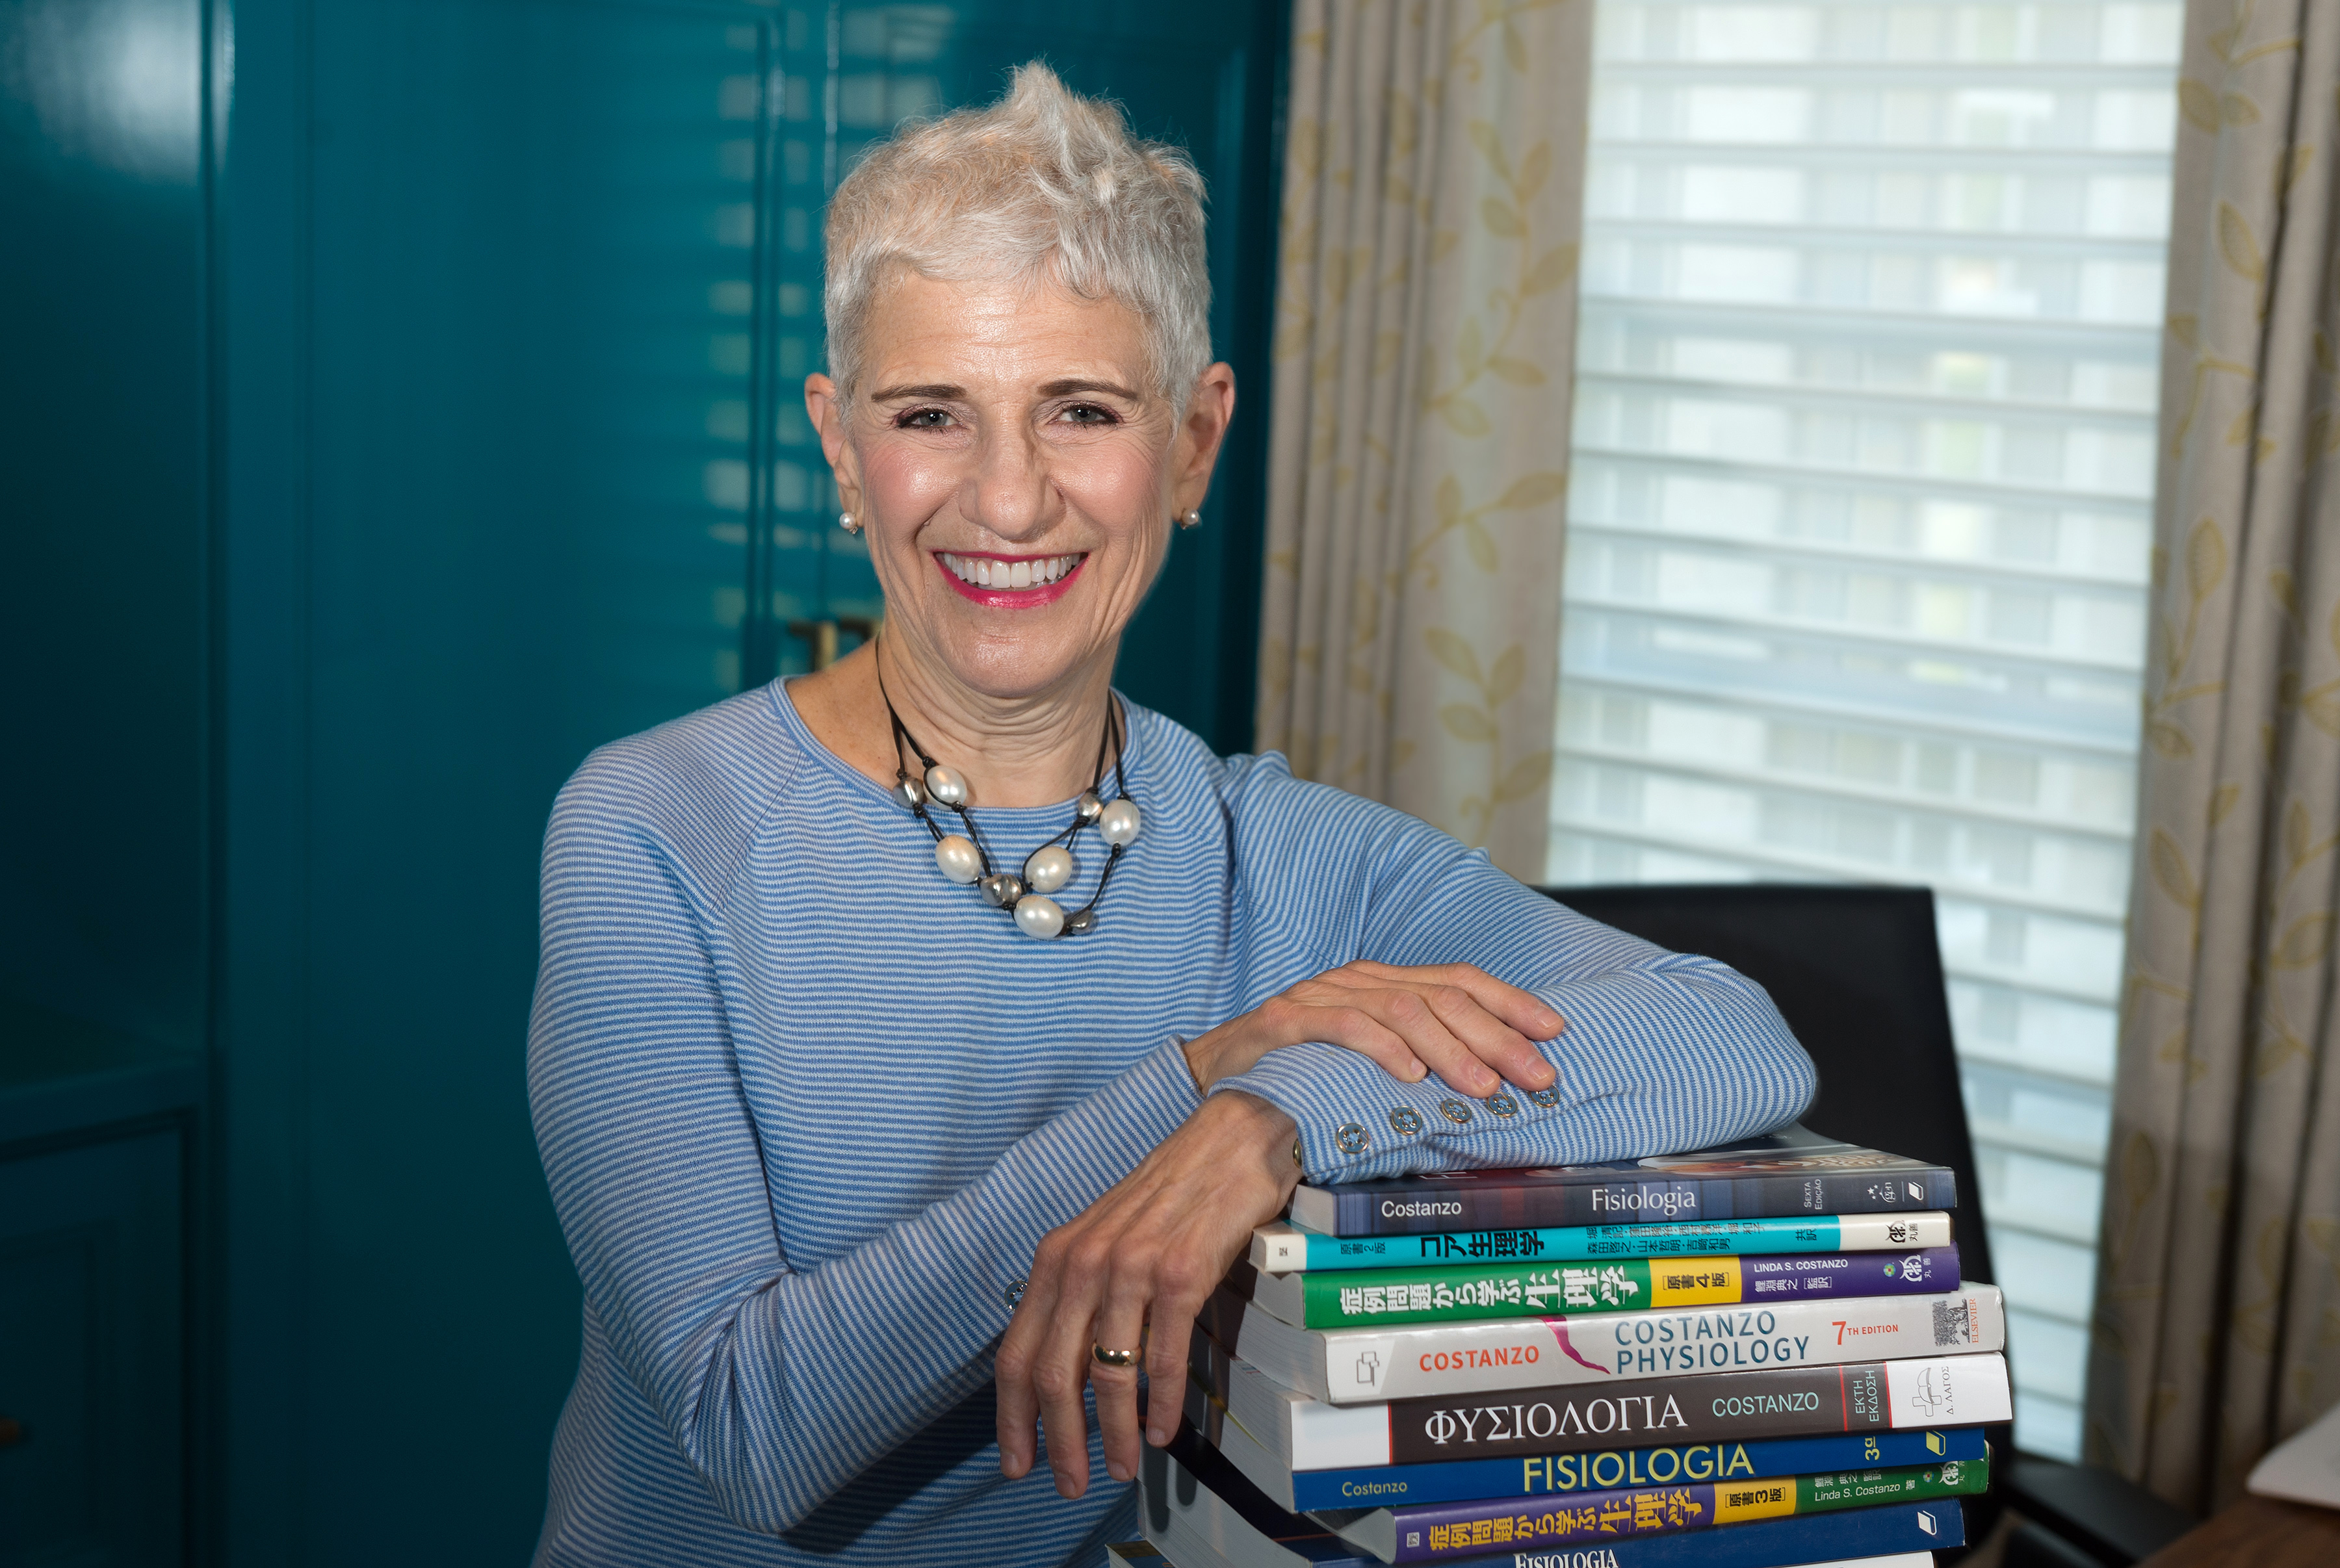 Linda Costanzo, Ph.D., has earned the nickname “physiology goddess” for her trio of books translated into 13 languages with more than 1 million books in print. (Photo by Kevin Schindler)